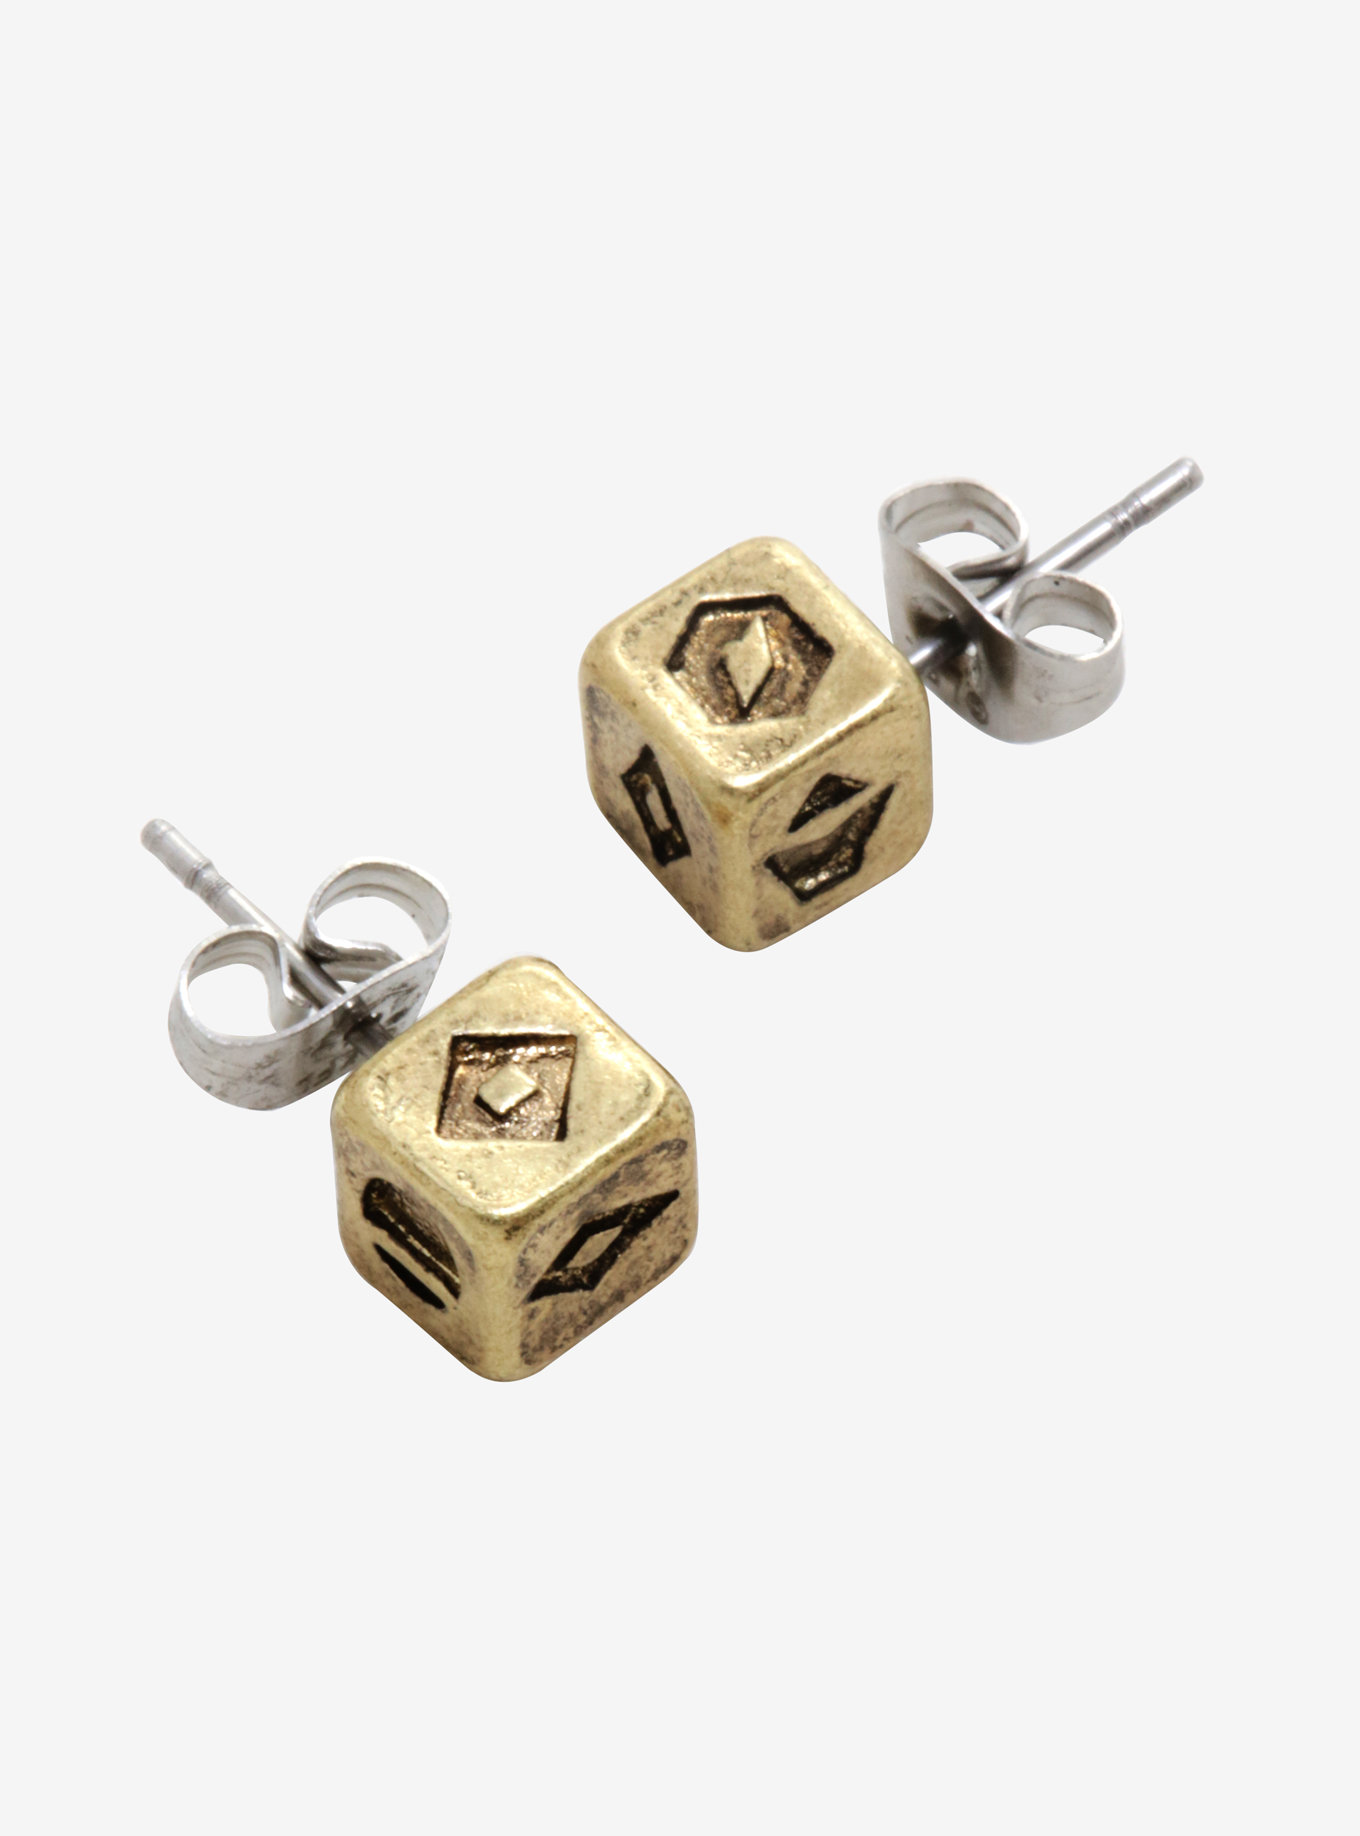 Star Wars Solo A Star Wars Story Dice Stud Earrings available exclusively at Box Lunch